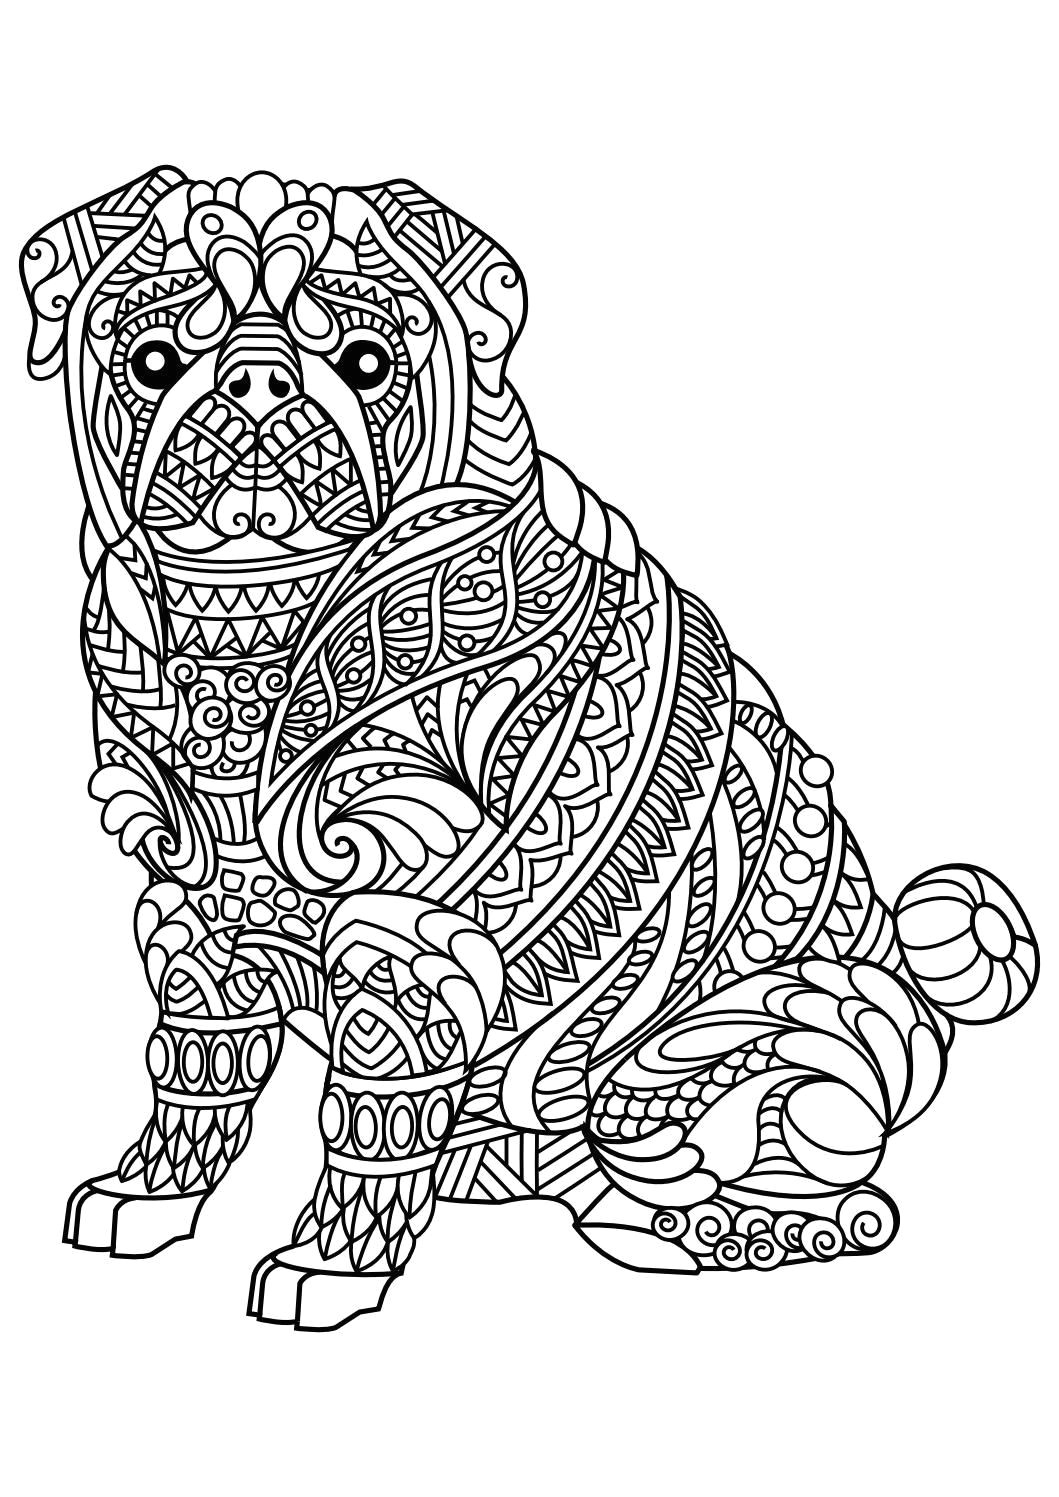 Drawing Dogs and Cats Pdf Animal Coloring Pages Pdf Coloring Animals Pinterest